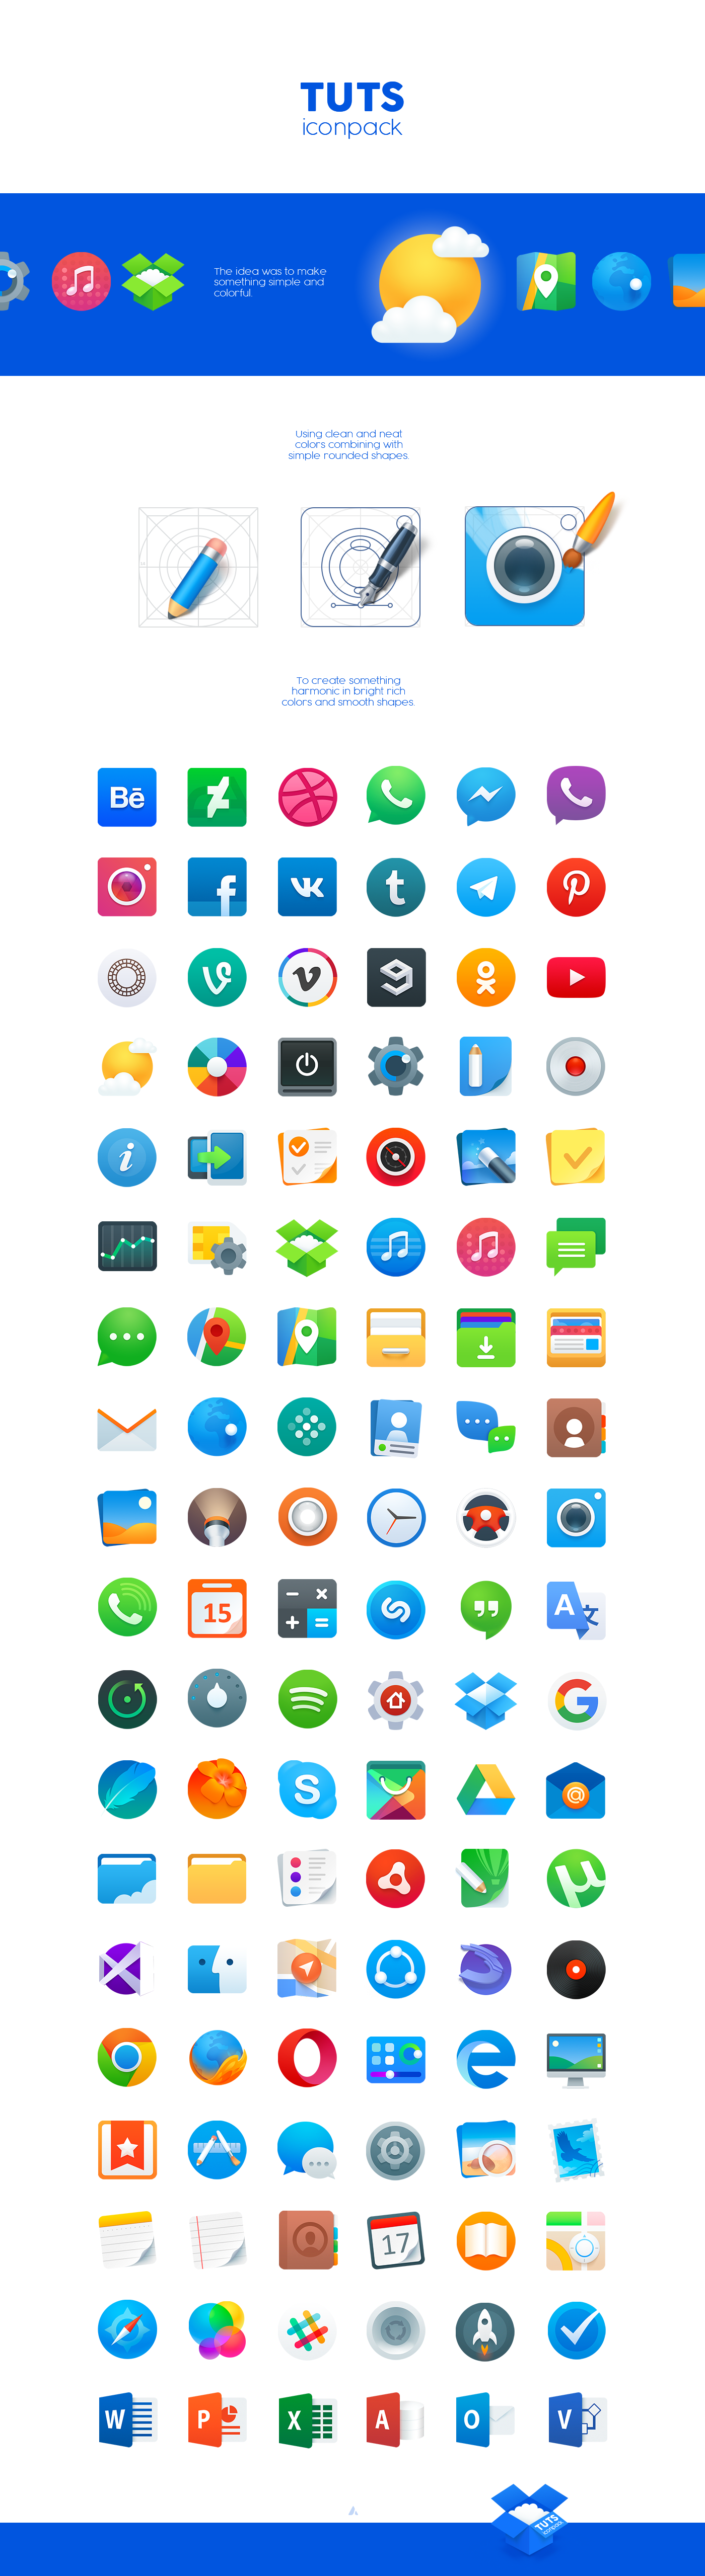 Icon icons android tuts iconpack colorful free